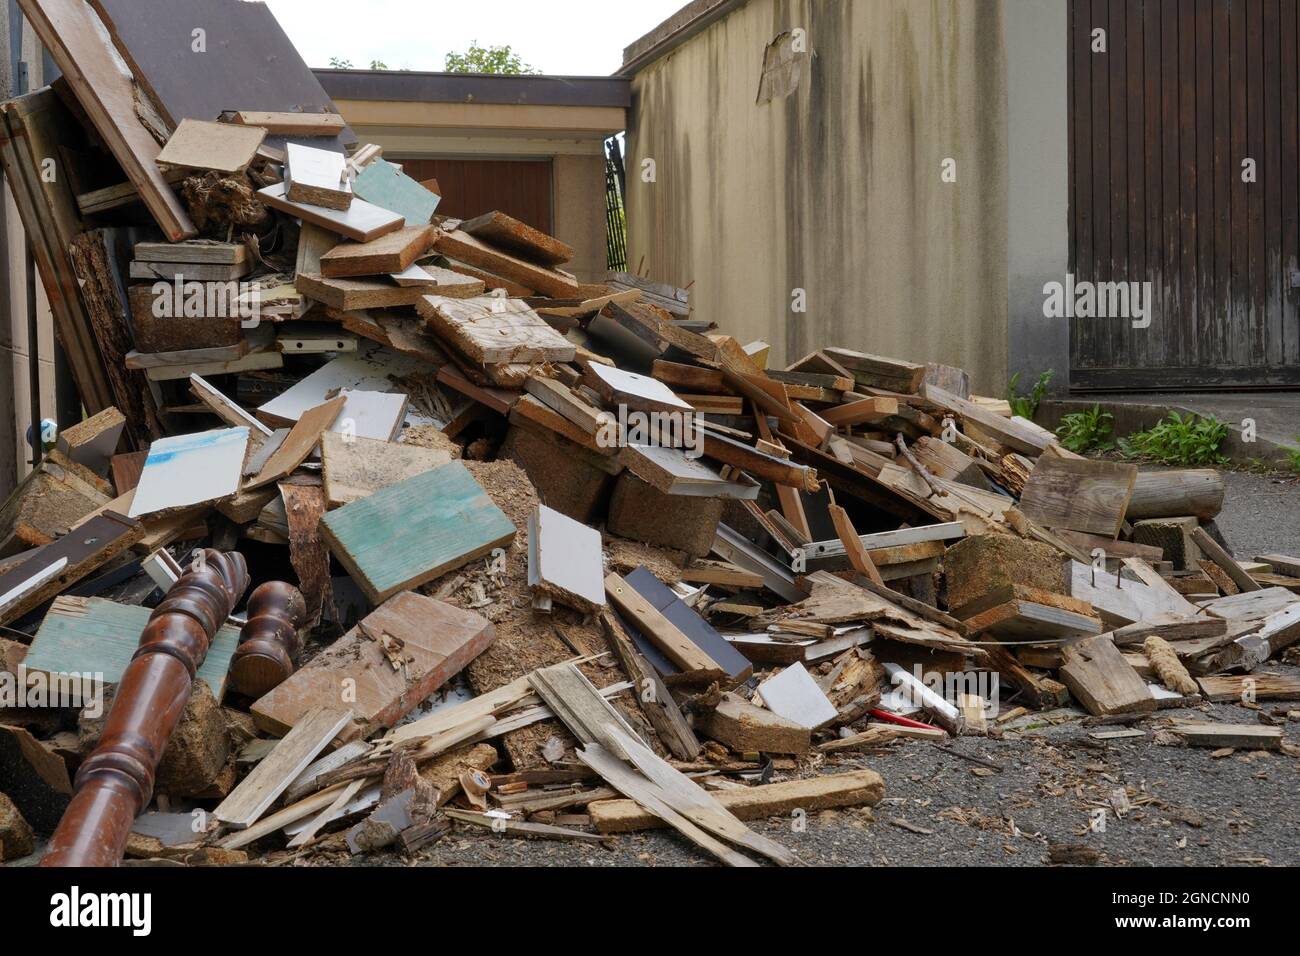 Dismantled furniture on a yard between two buildings. There are pieces of wooden furniture piled up. They are of irregular size. Stock Photo